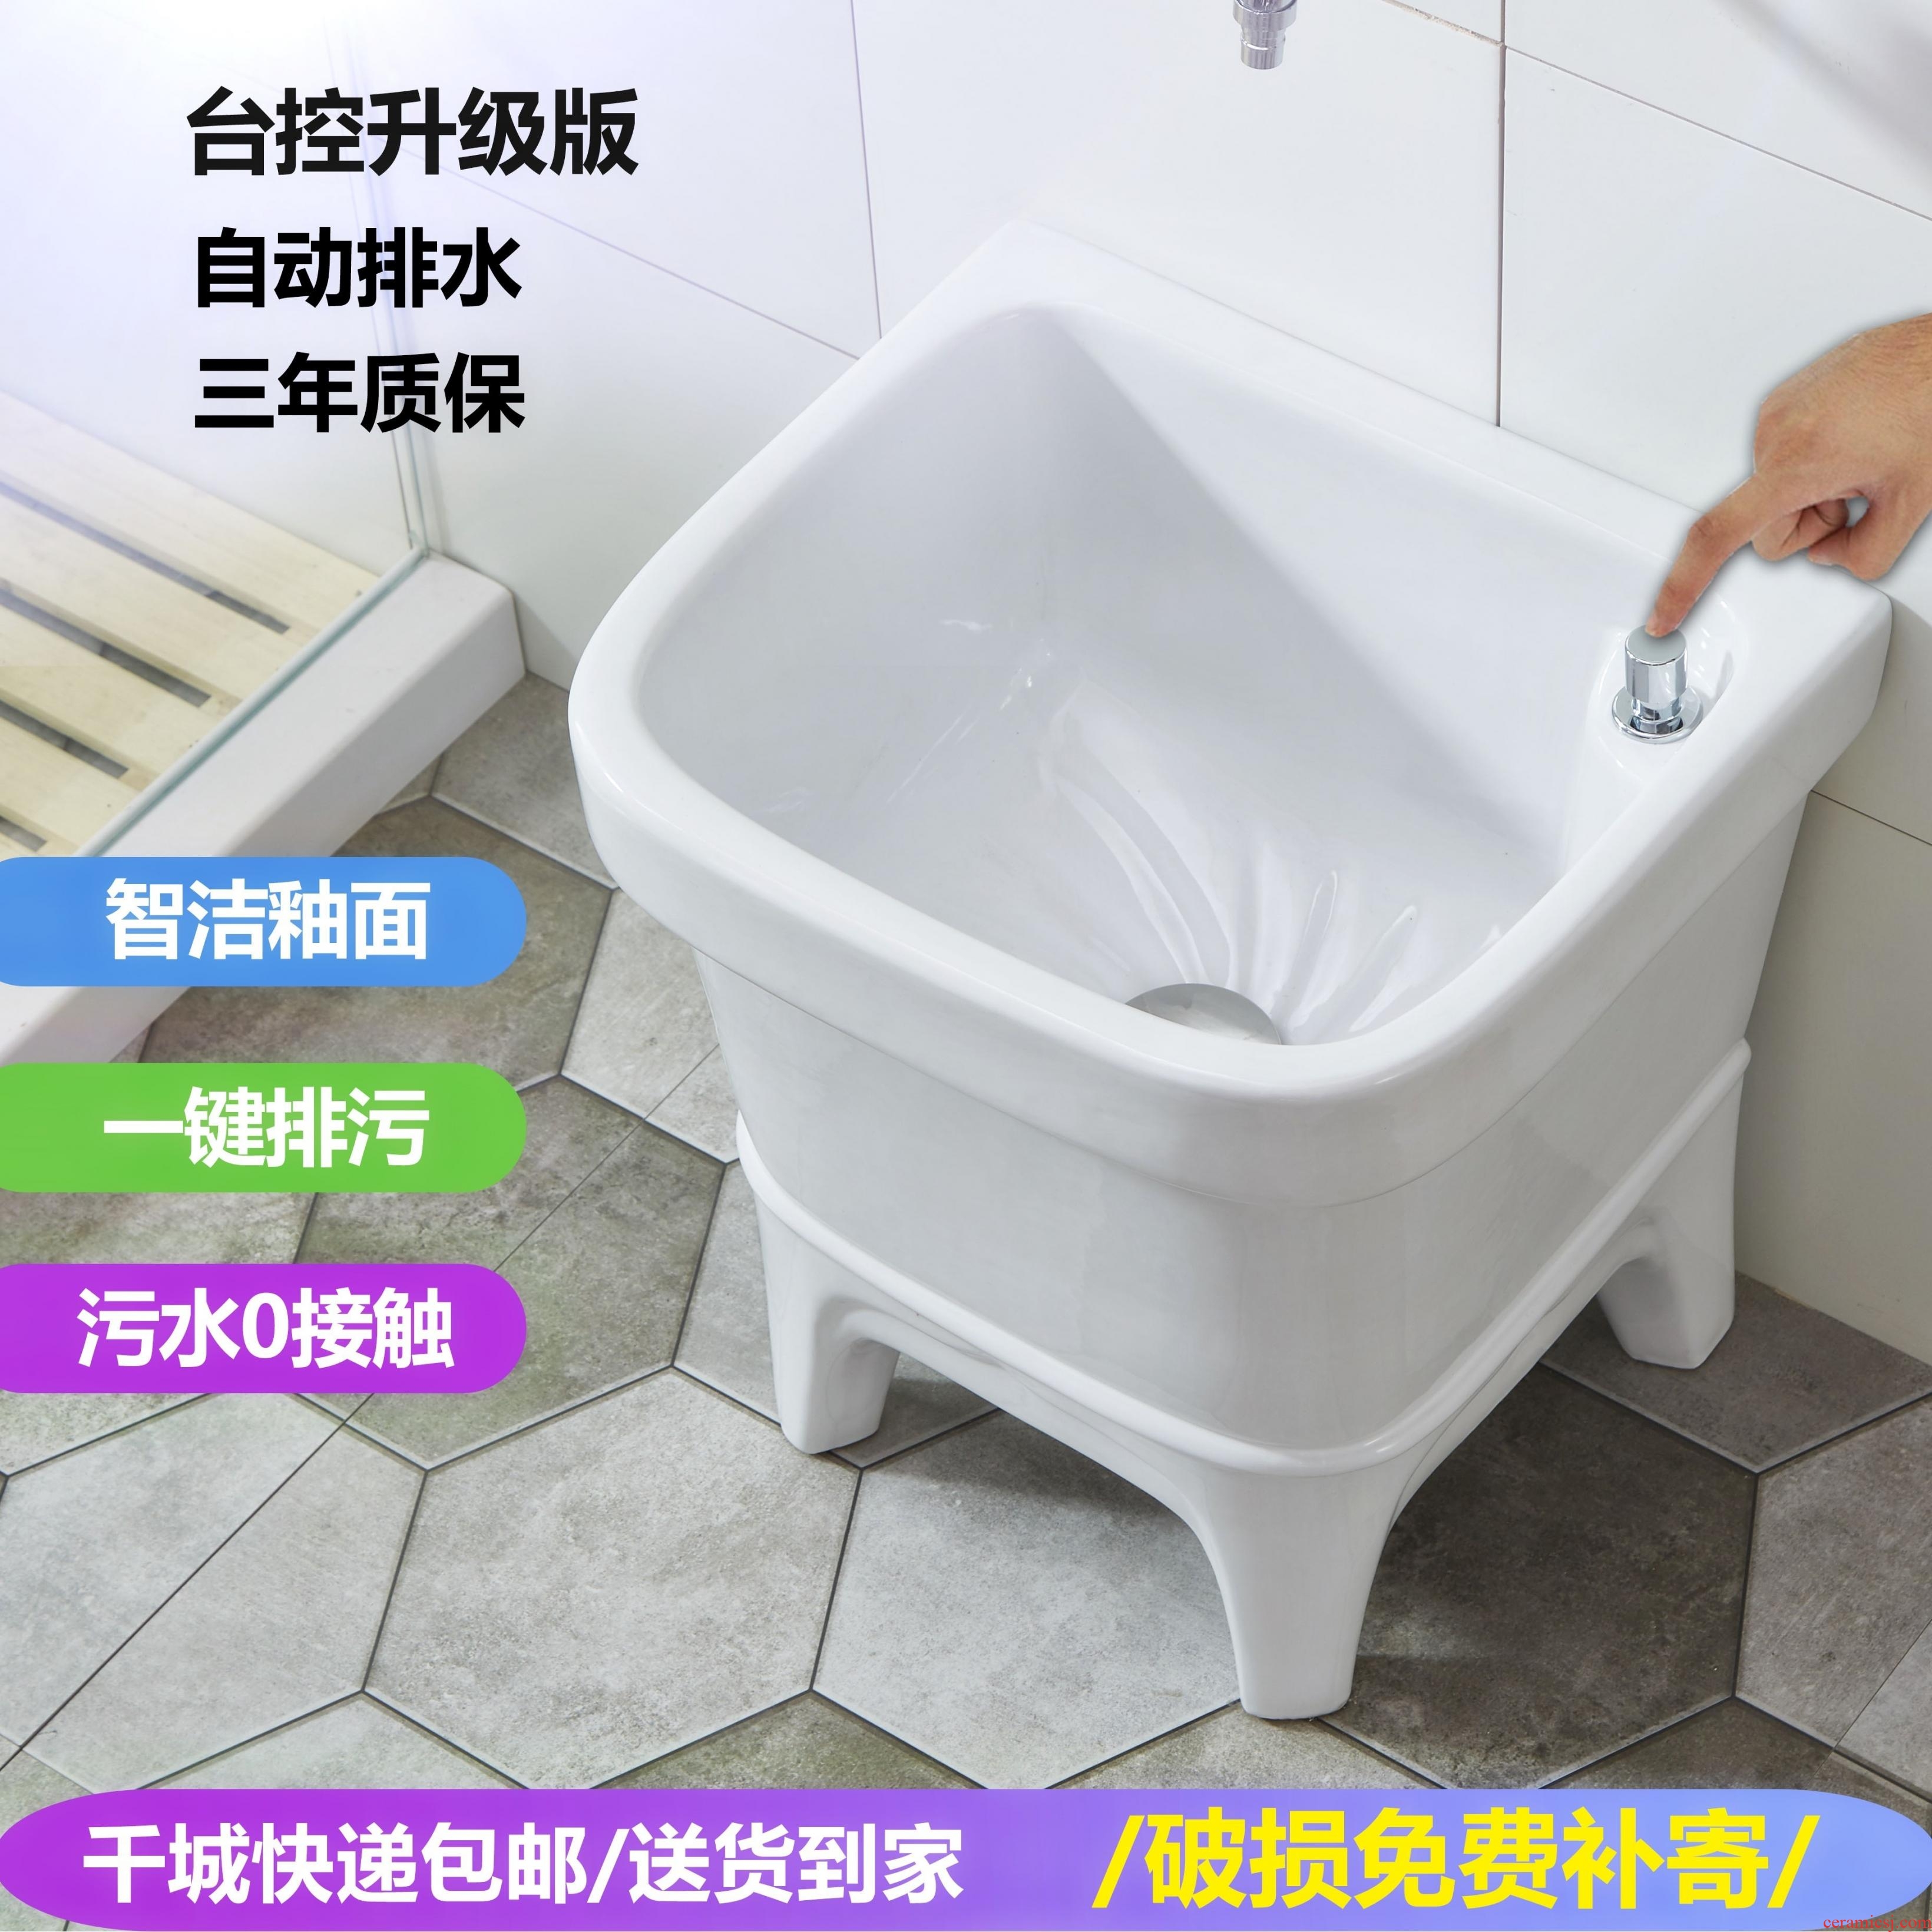 The Pool to tora washing basin bathroom ceramic mop Pool large is suing laundry wastewater dou mop mop basin